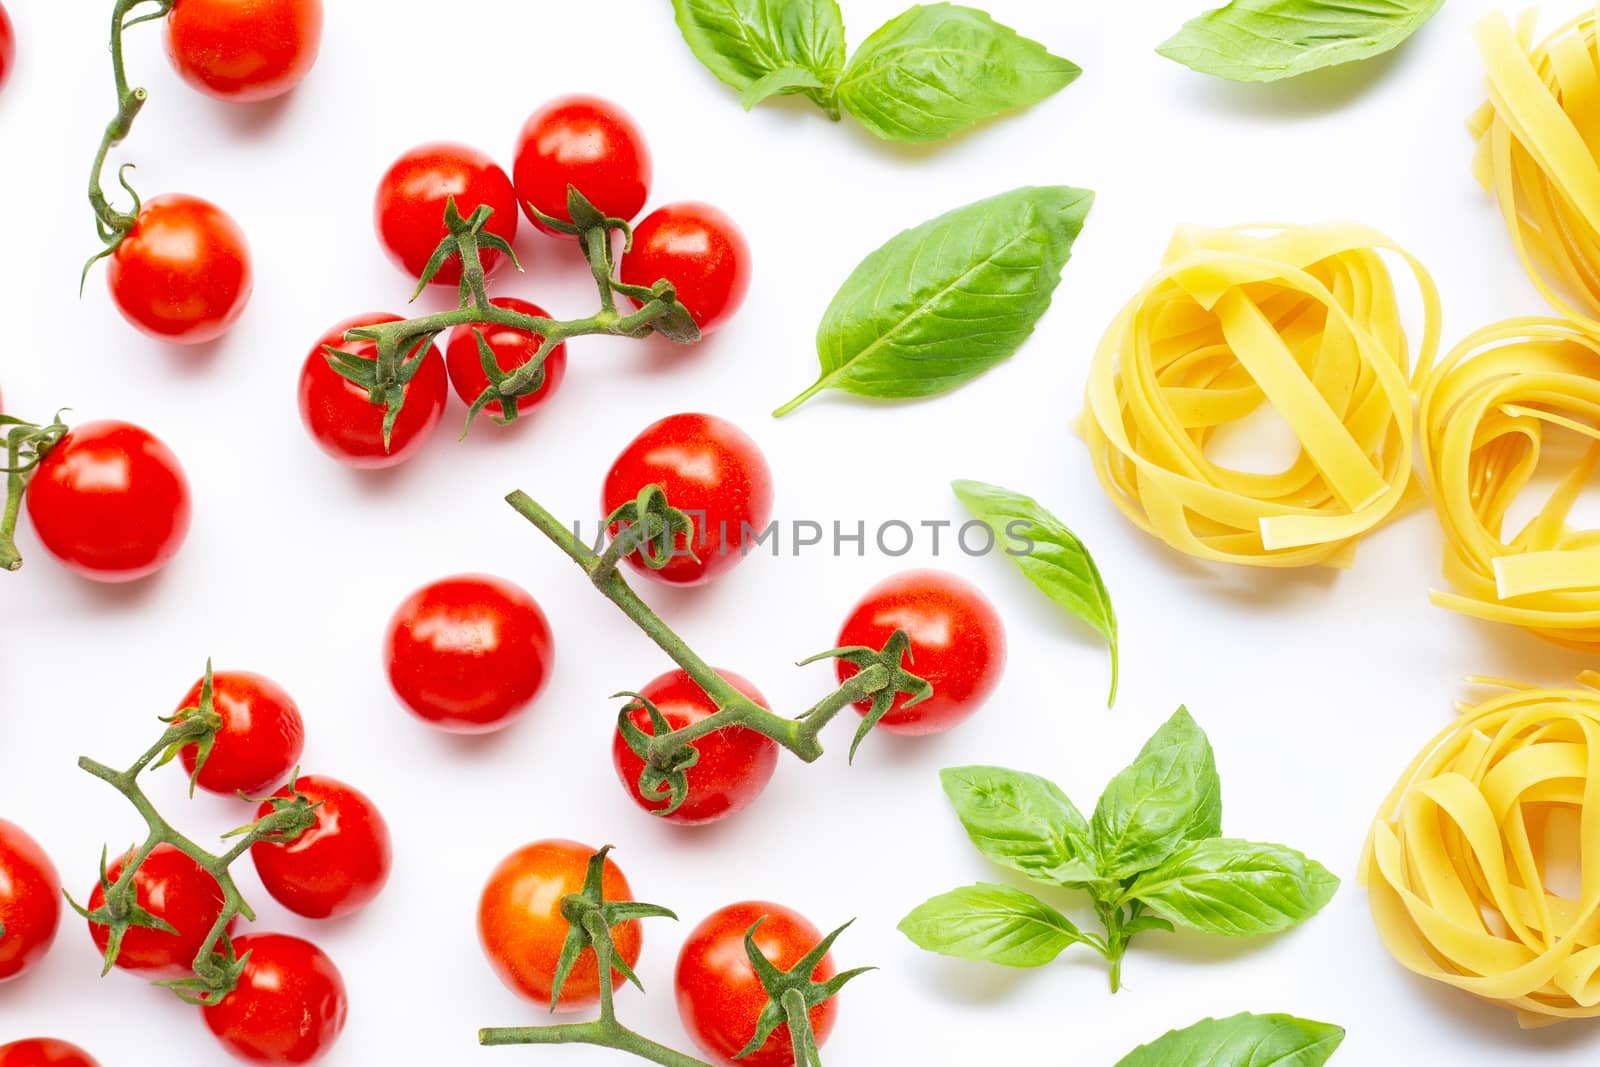 Cherry tomatoes with  basil leaves  and uncooked pasta tagliatelle nest on white background. Italian food concept